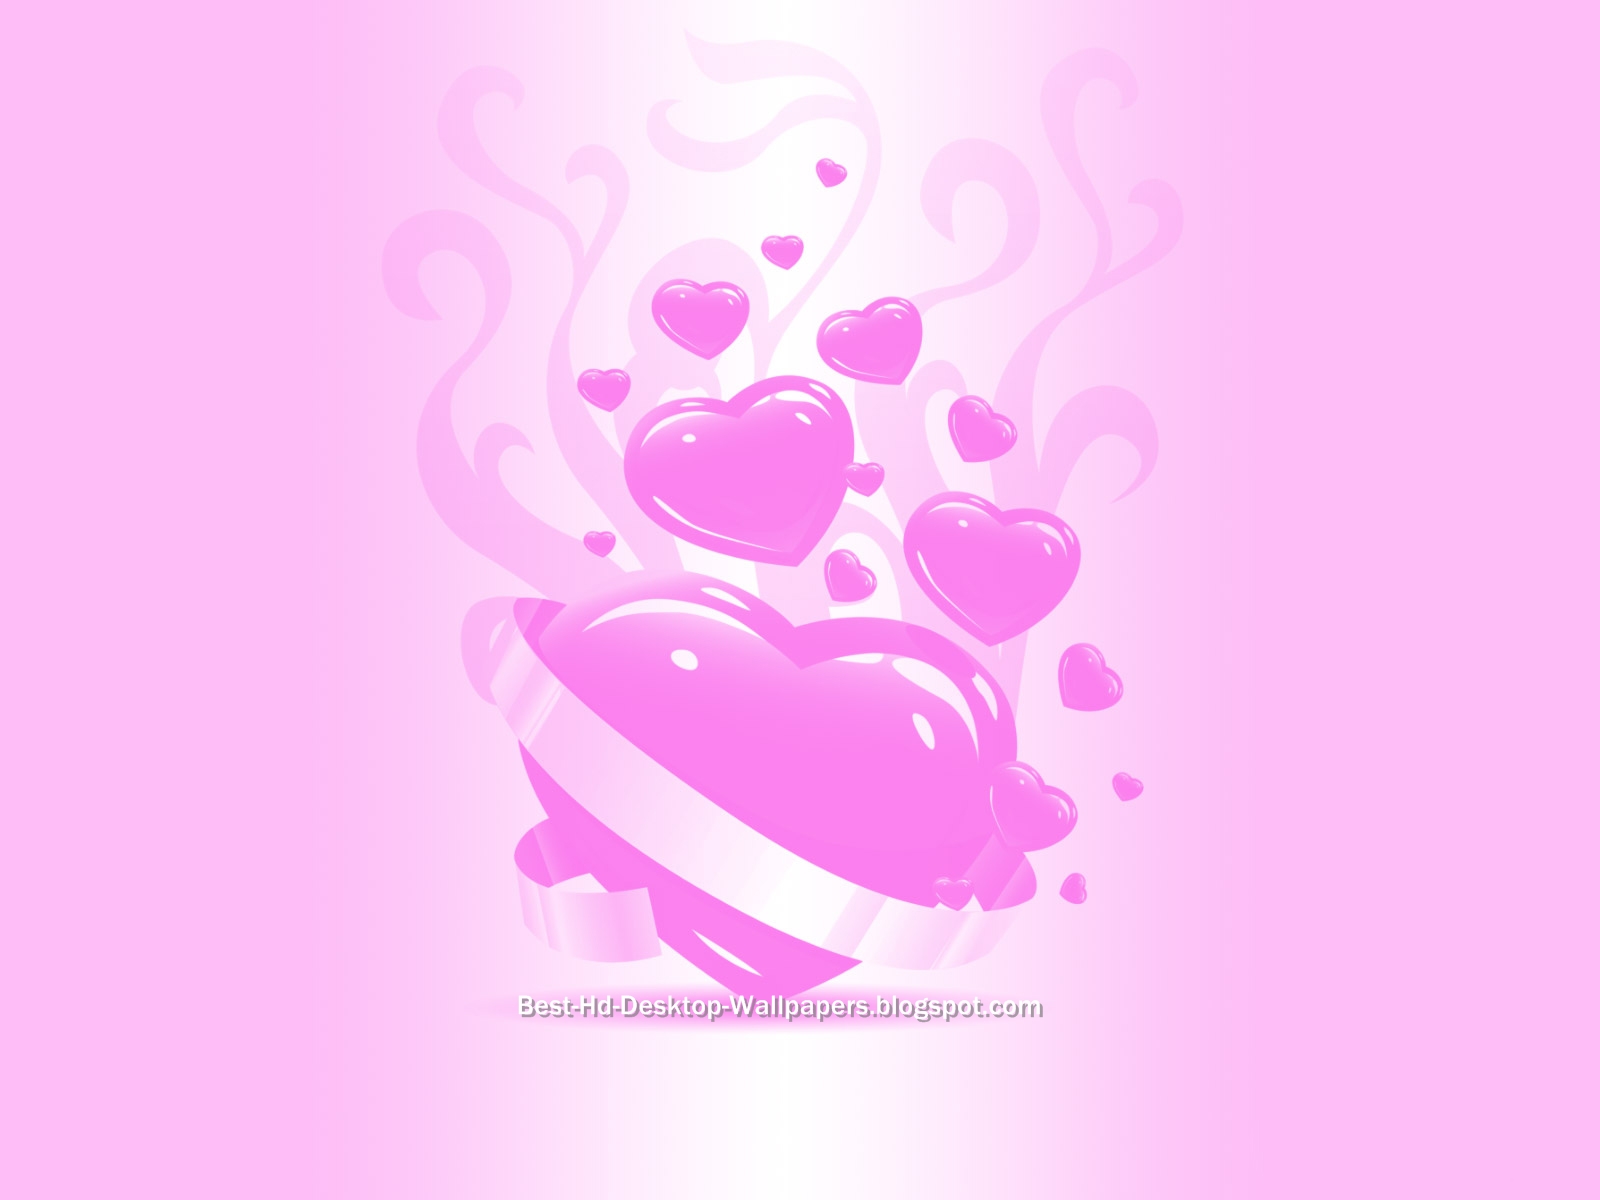 Pretty Pink Hearts Background Ing Gallery